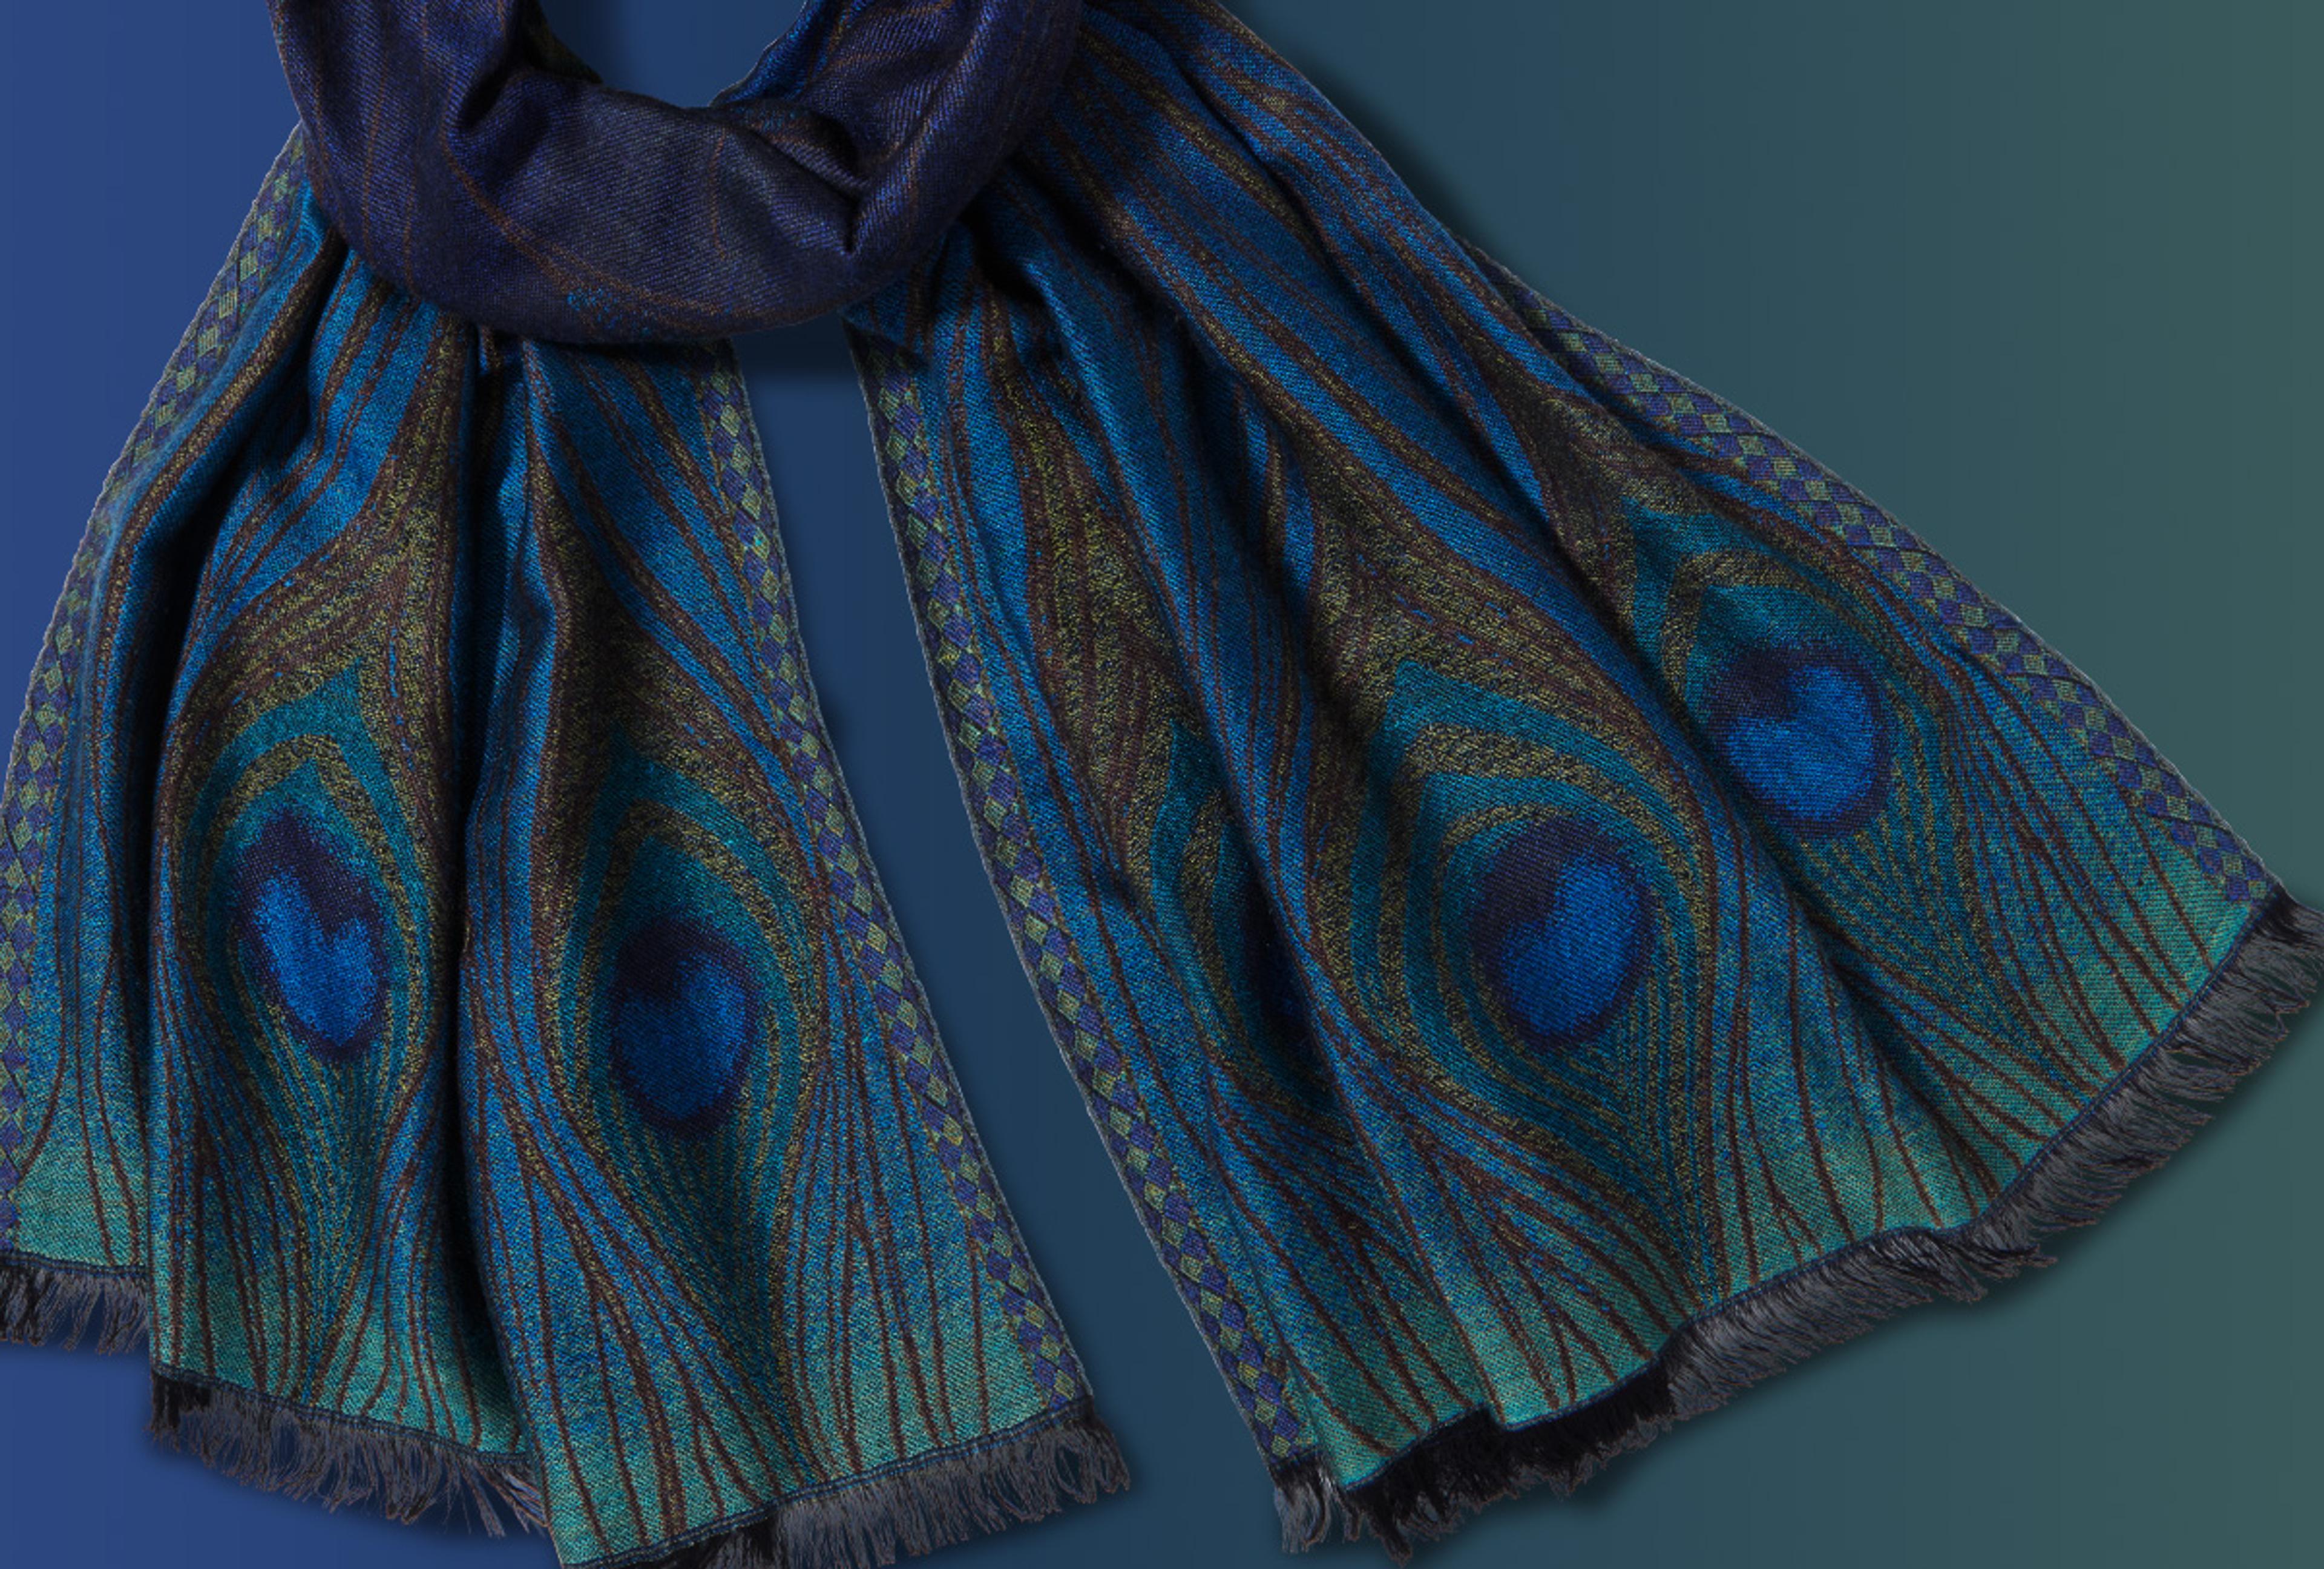 Scarf with peacock feather design photographed against a deep blue and green ombre background.